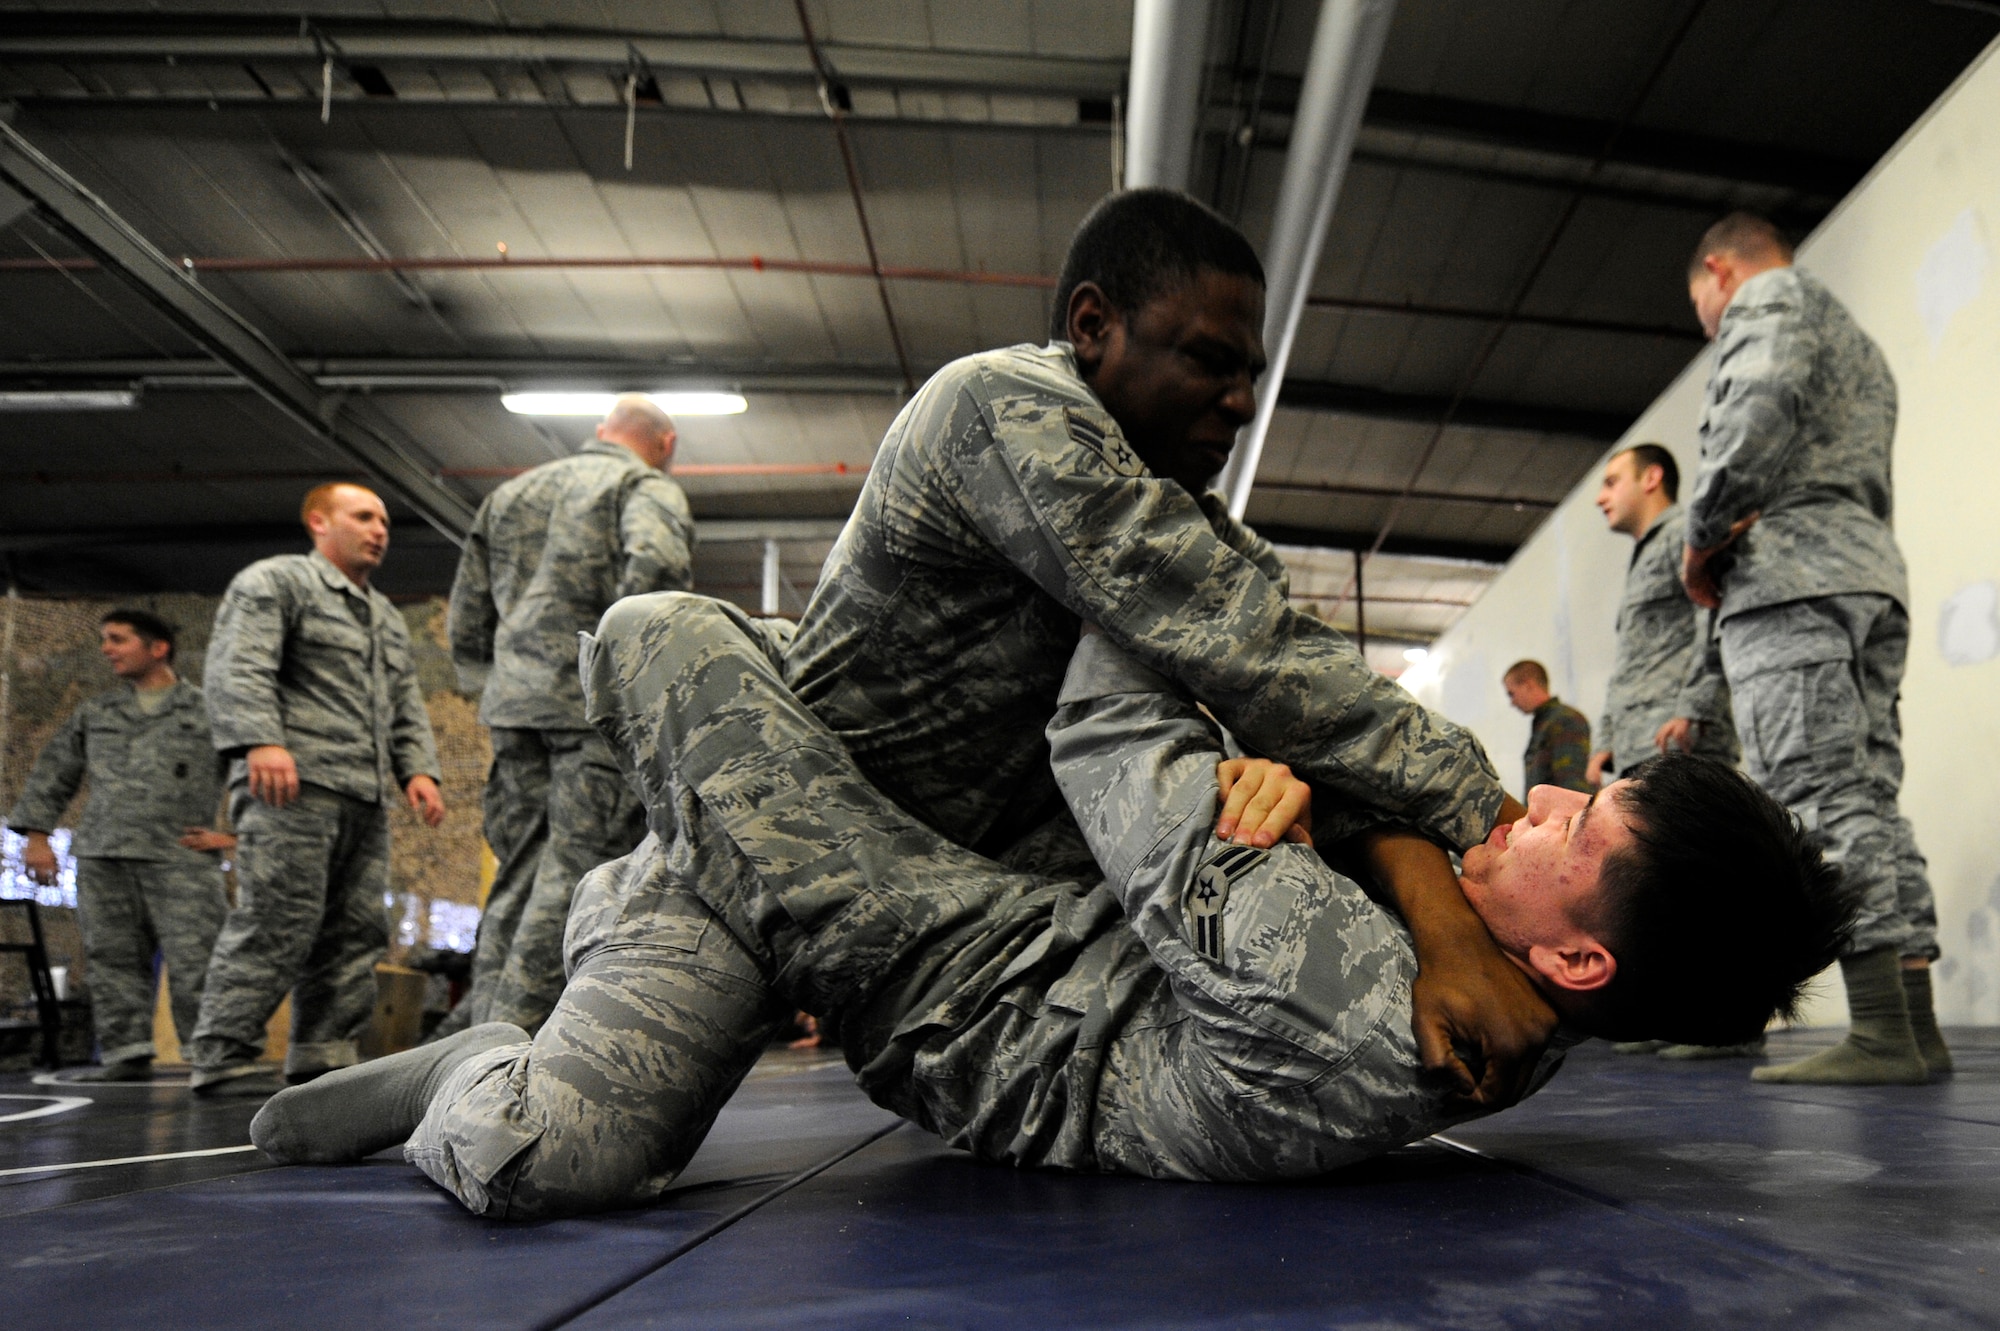 Air Force Airman 1st Class Stephen Buesing and Air Force Airman 1st Class Darren Joyner, 86th Security Forces Squadron members, practice flyaway security team ground combat training Dec. 07, 2011, Ramstein Air Base, Germany.  The F.A.S.T specialize in military teams that are in support of contingencies, theater security operation events, humanitarian and civic assistance projects, AEF deployments, and military operations other than war. (U.S. Air Force photo by Staff Sgt. Chris Willis)